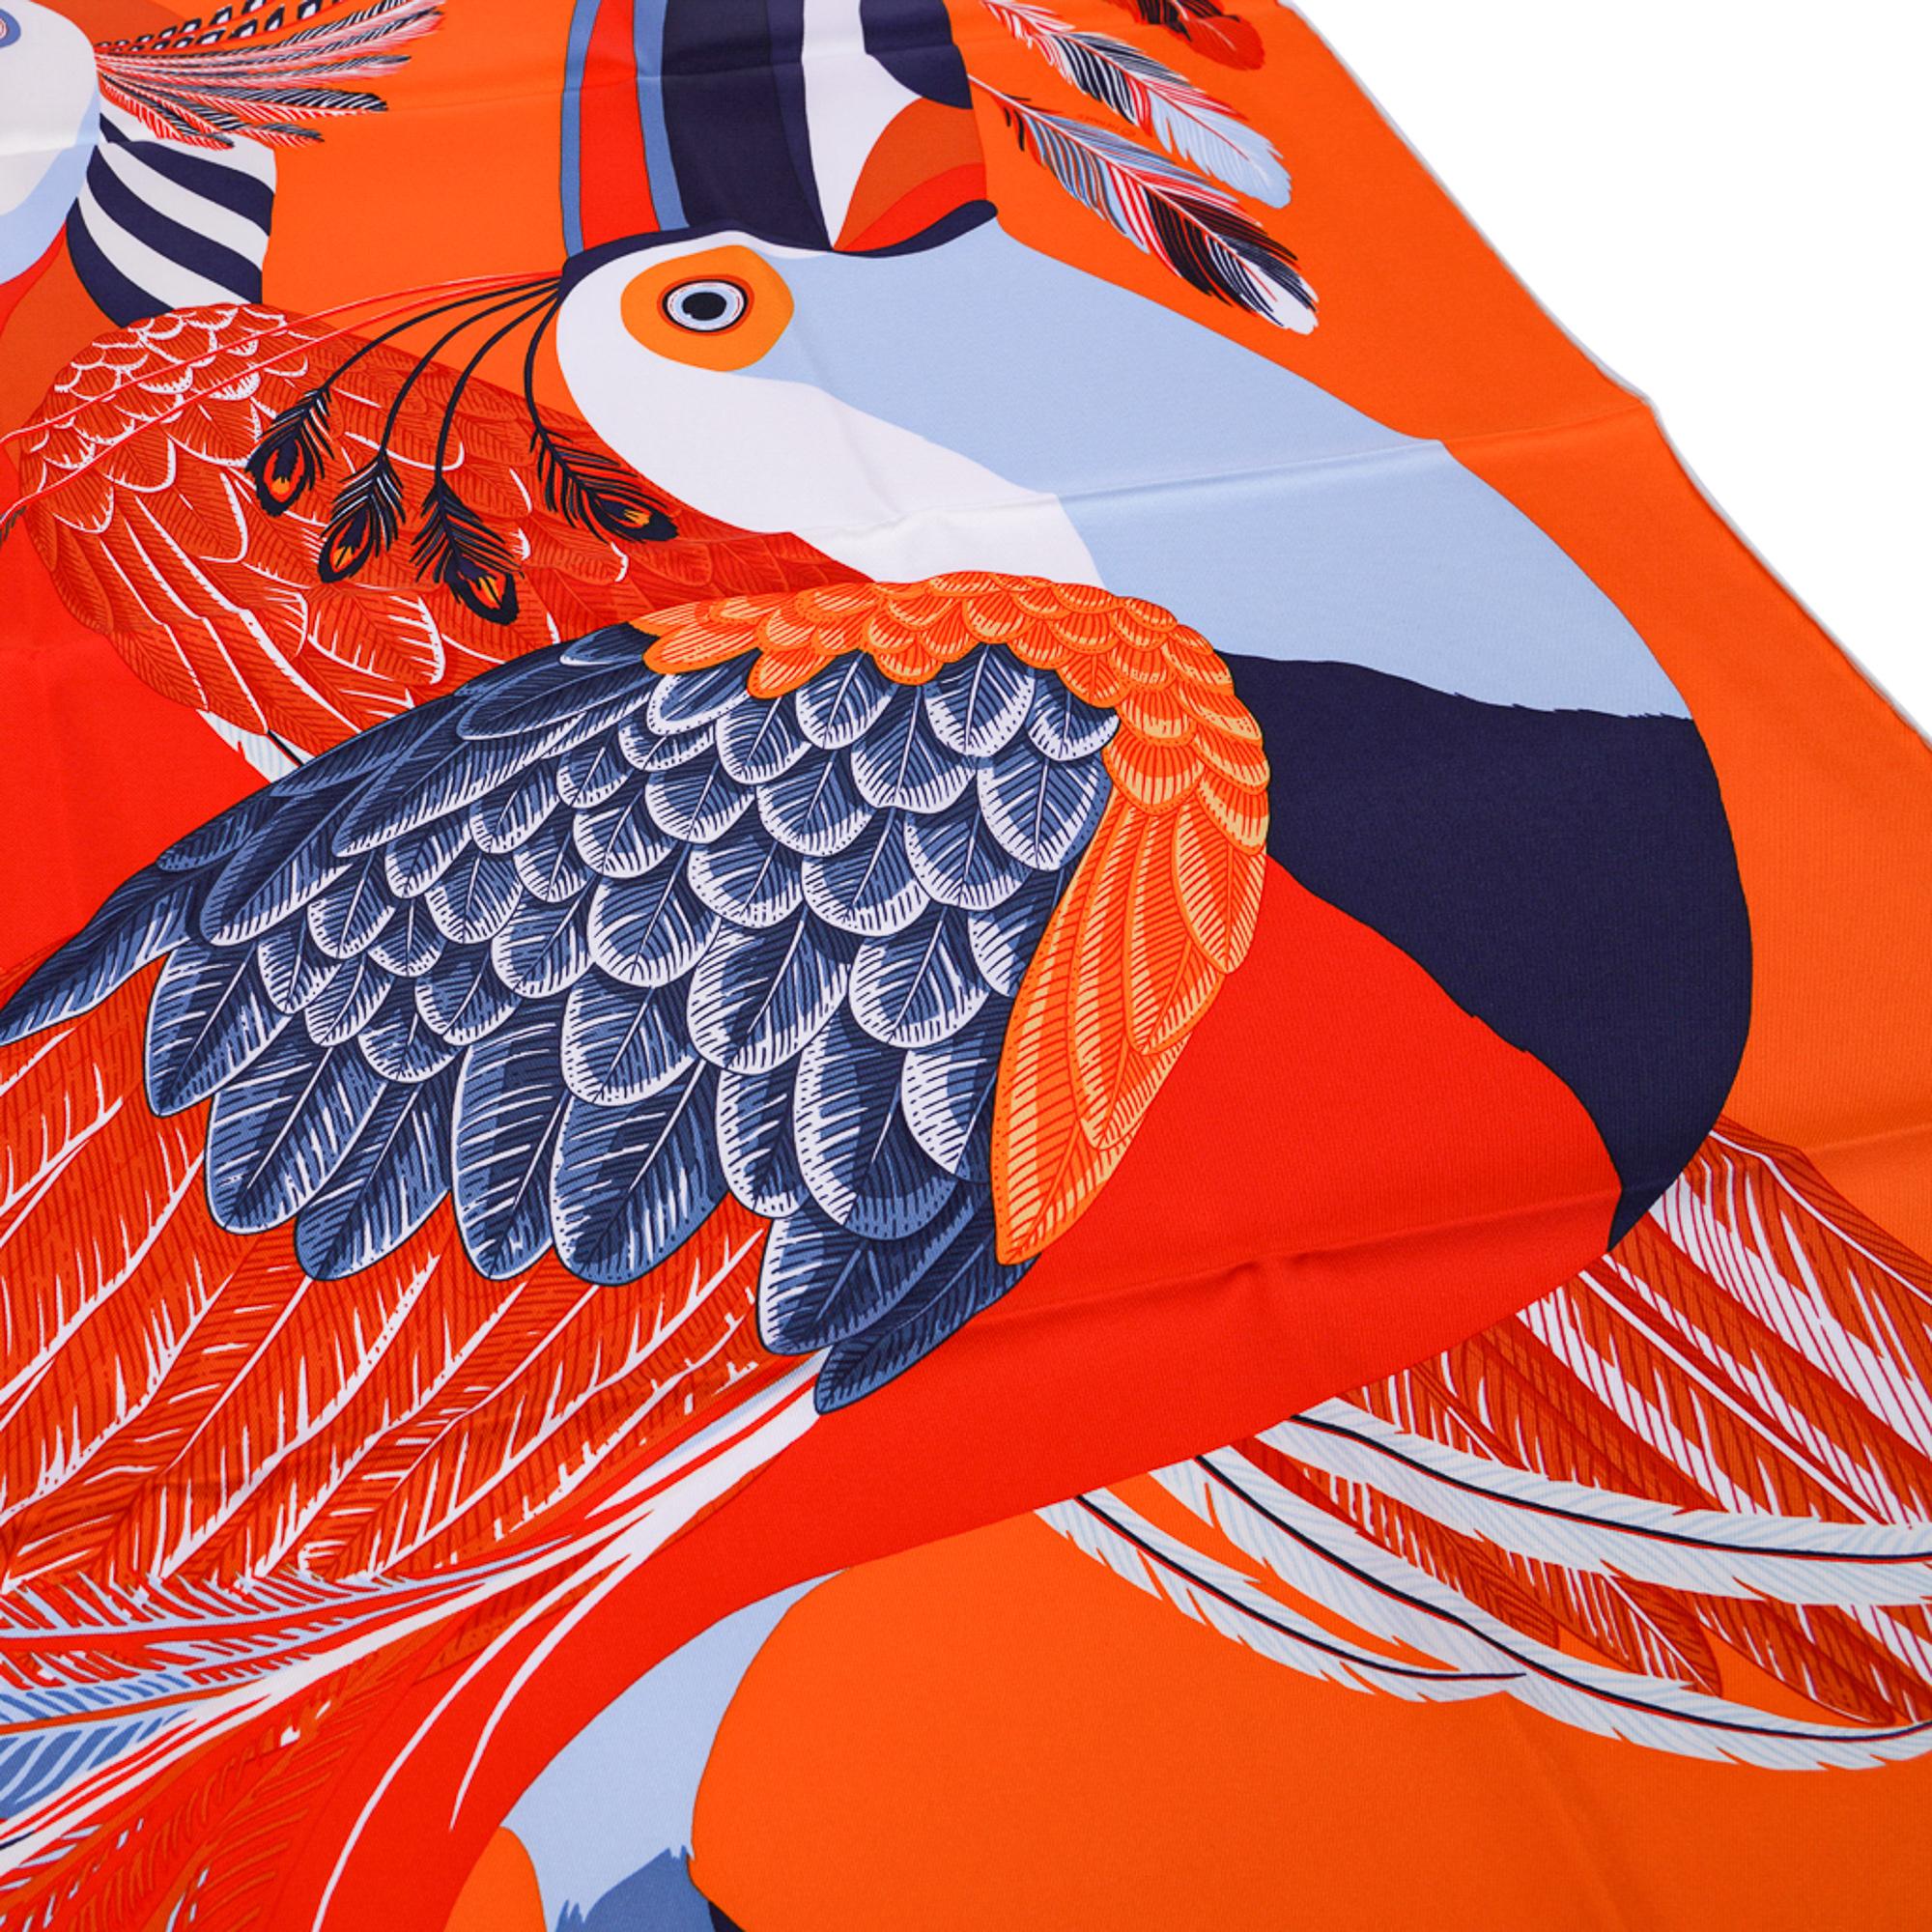 Guaranteed authentic Hermes Toucans De Paradis 90 Silk Twill scarf.
In shades of Orange, Marine and Ciel.
Designed by Katie Scott.
Comes with signature Hermes box and ribbon.
Signature hand rolled edge.
NEW or NEVER WORN
final sale

SCARF